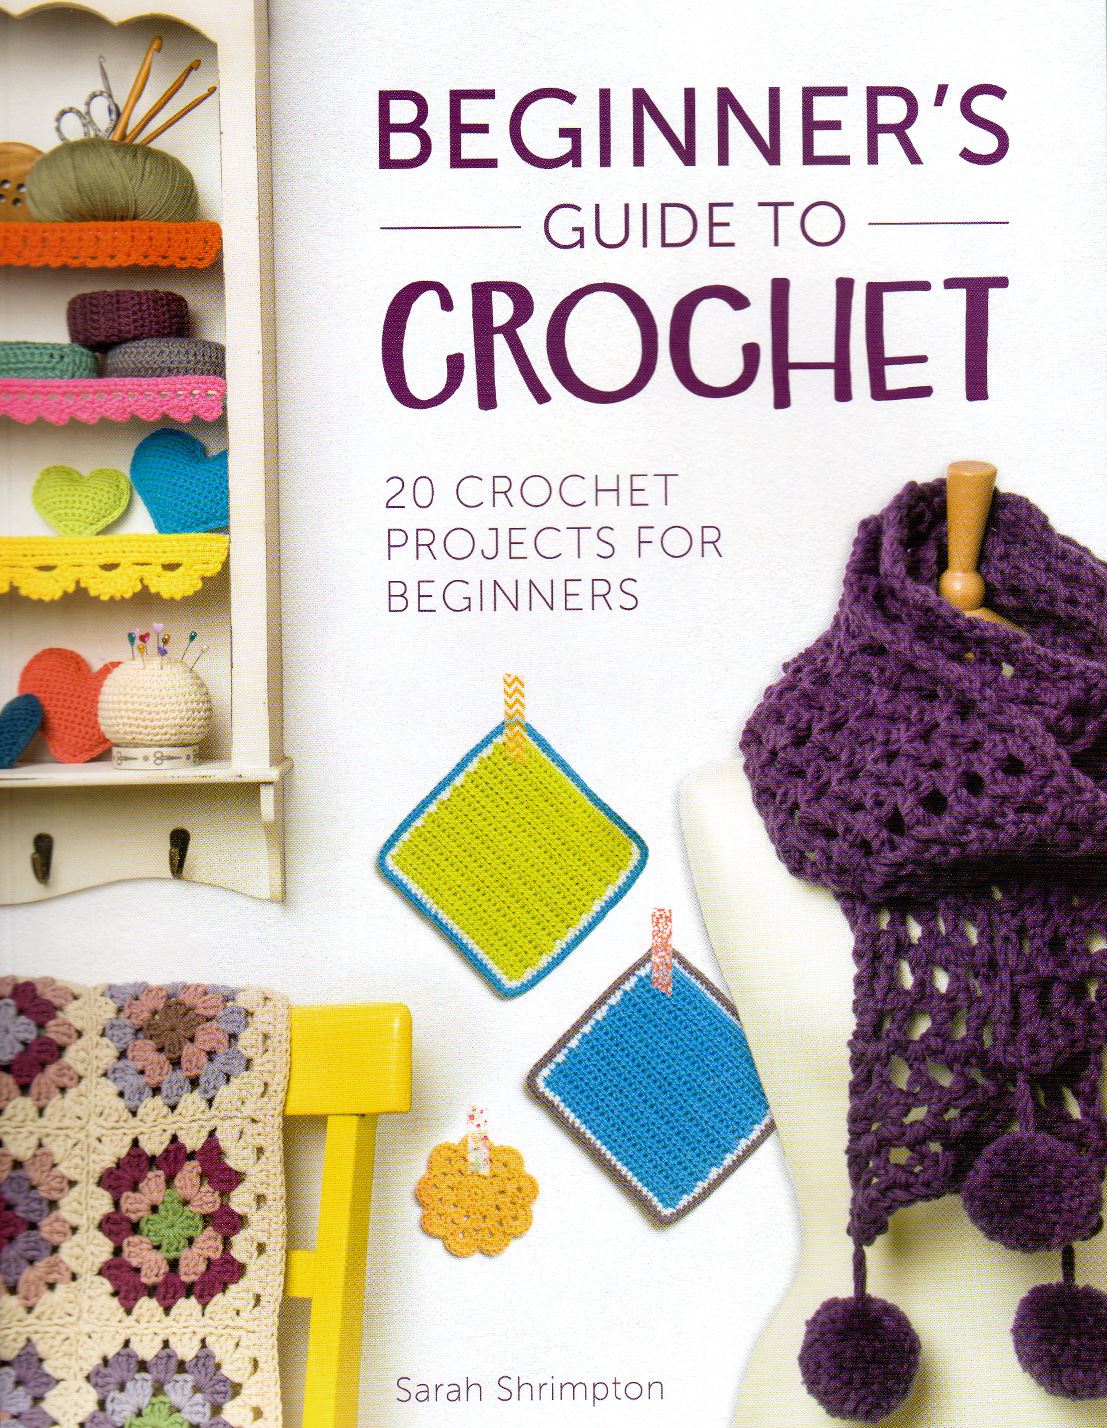 Modern Granny Square Crochet and More, Book by Laura Strutt, Official  Publisher Page